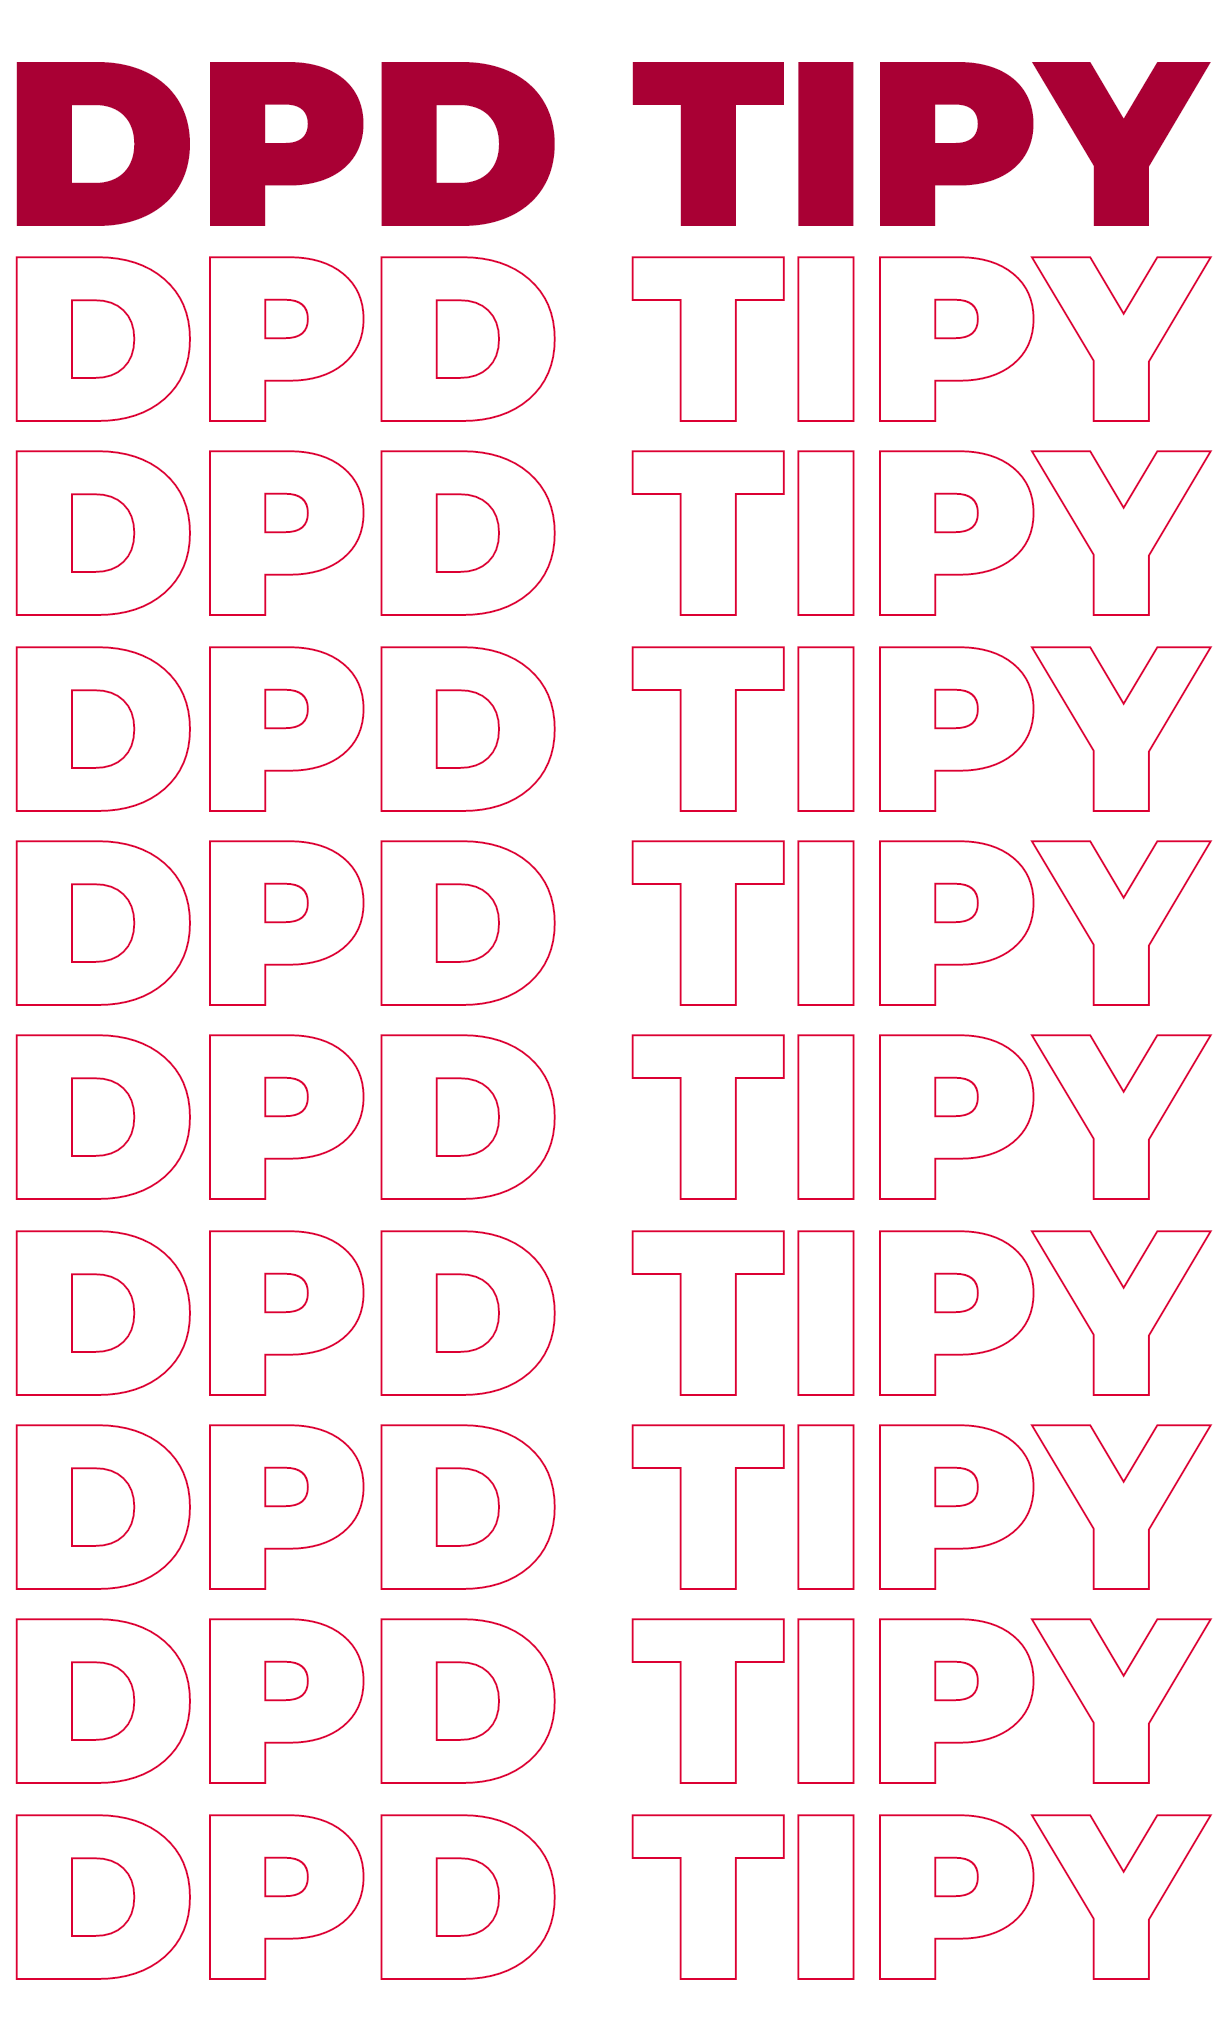 DPD tipy - text